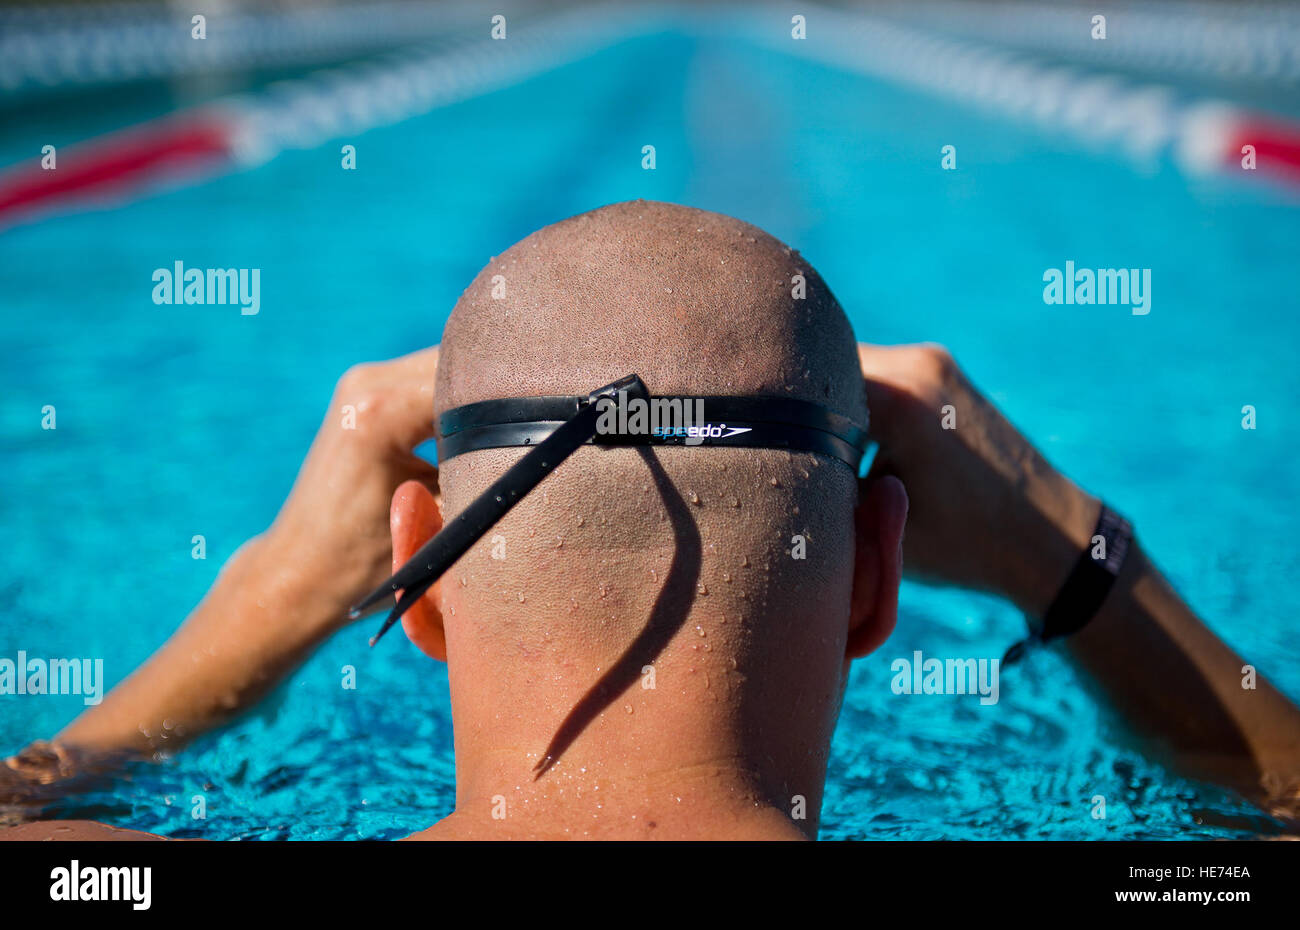 Senior Airman Francisco Perez Castillo, 96th Maintenance Group, adjusts his goggles before beginning a lap swim training session March 22 at Eglin Air Force Base, Fla.  The 26-year-old Airman was recently inducted into the Pontifical Catholic University of Puerto Rico Sports Hall of Fame.  Samuel King Jr.) Stock Photo